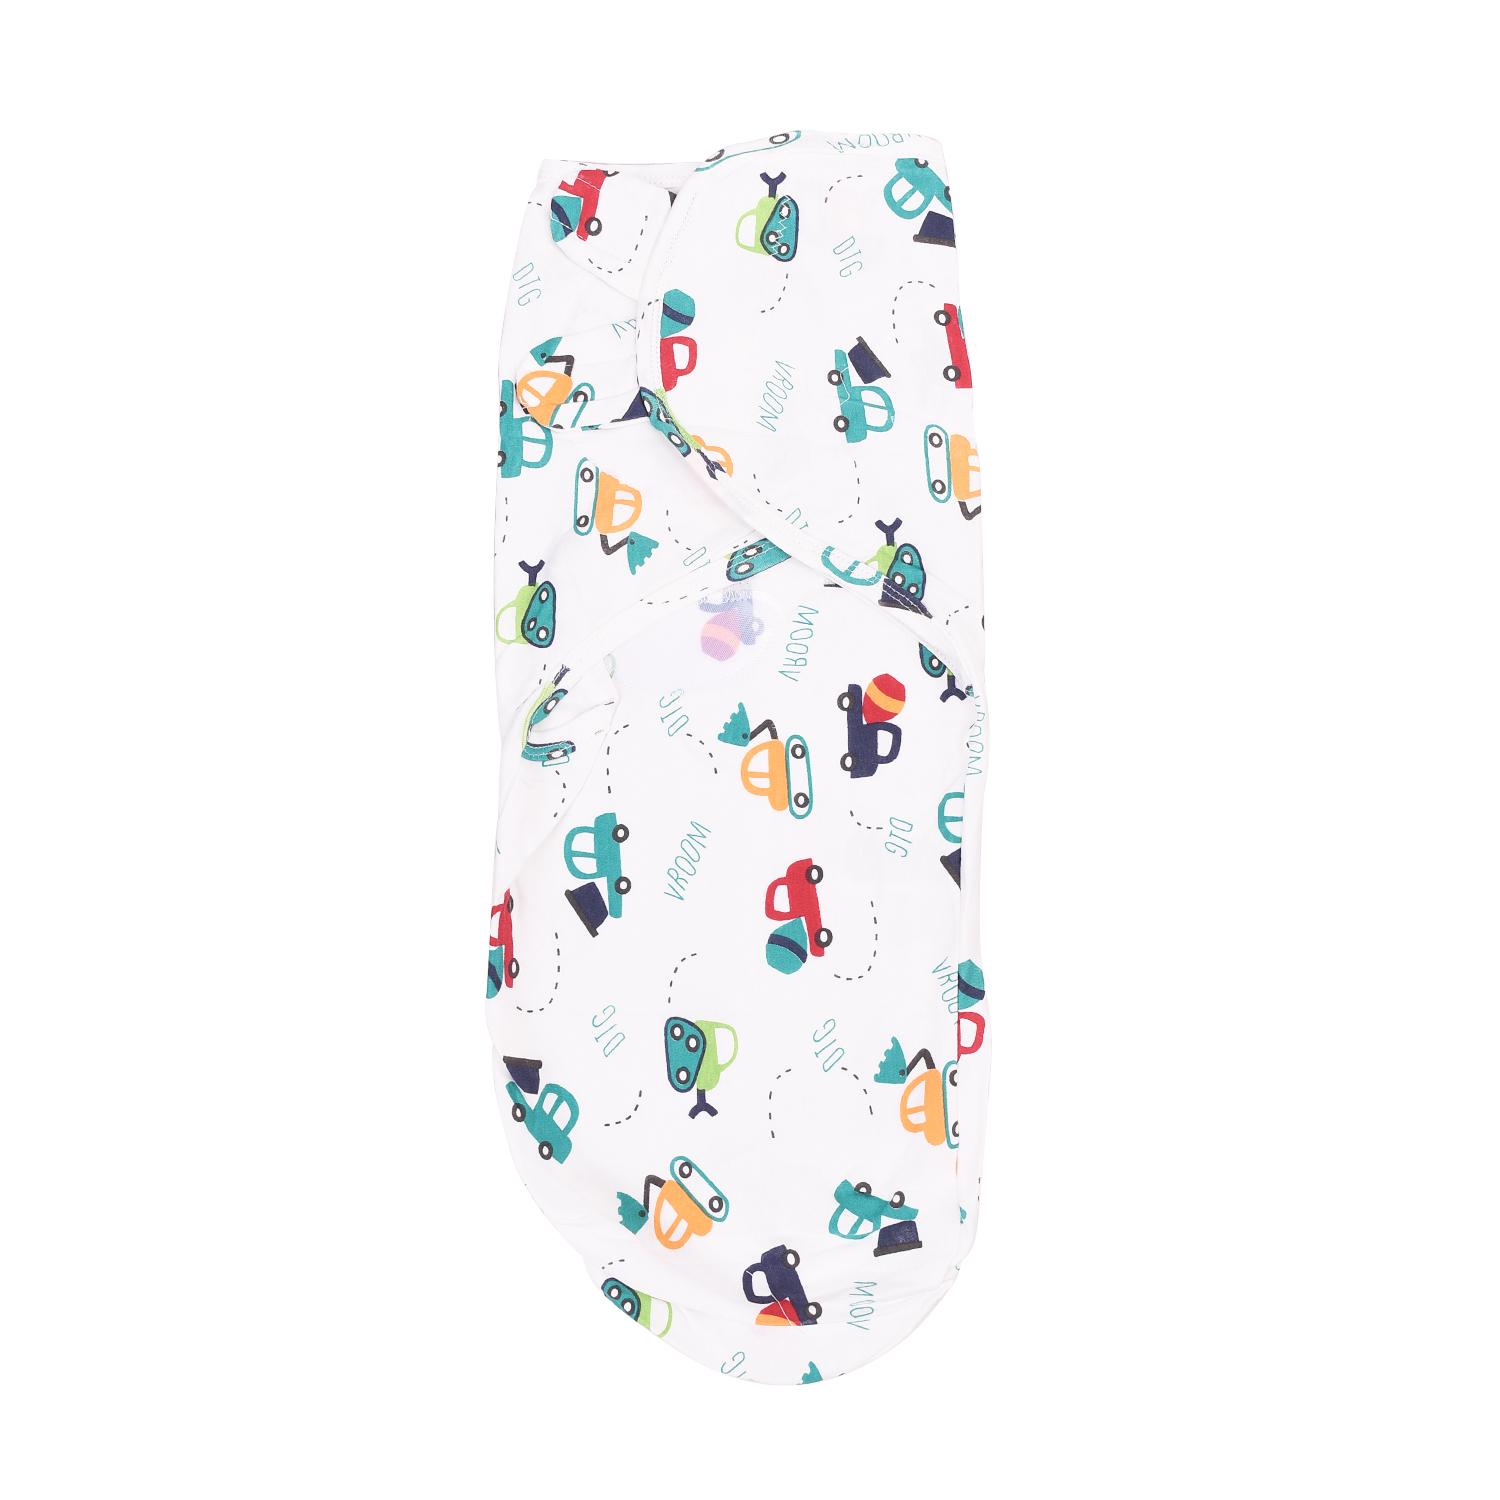 Baby Swaddle Adjustable Infant wrap- 0-3 Months -Pack of 2 -Any Design